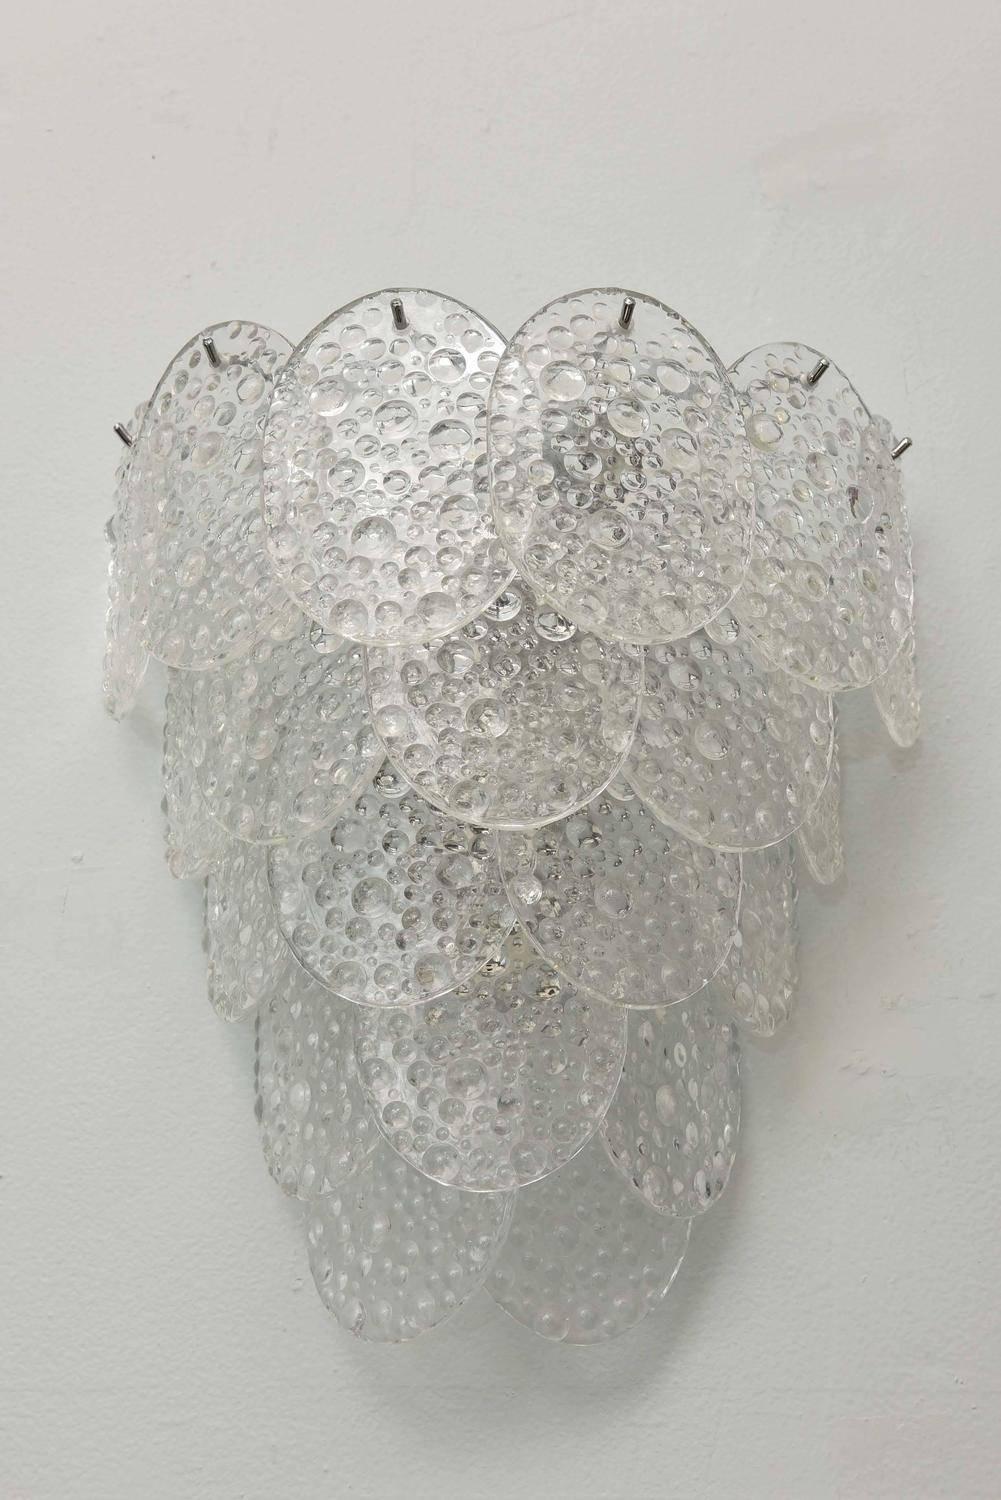 Vintage Italian wall lights with circular clear Murano glasses hand blown with bubbled textured pattern, mounted on chrome frames / Designed by Mazzega, circa 1960s / Made in Italy
2 lights / E12 or E14 type / max 40W each
Measures: Height 12